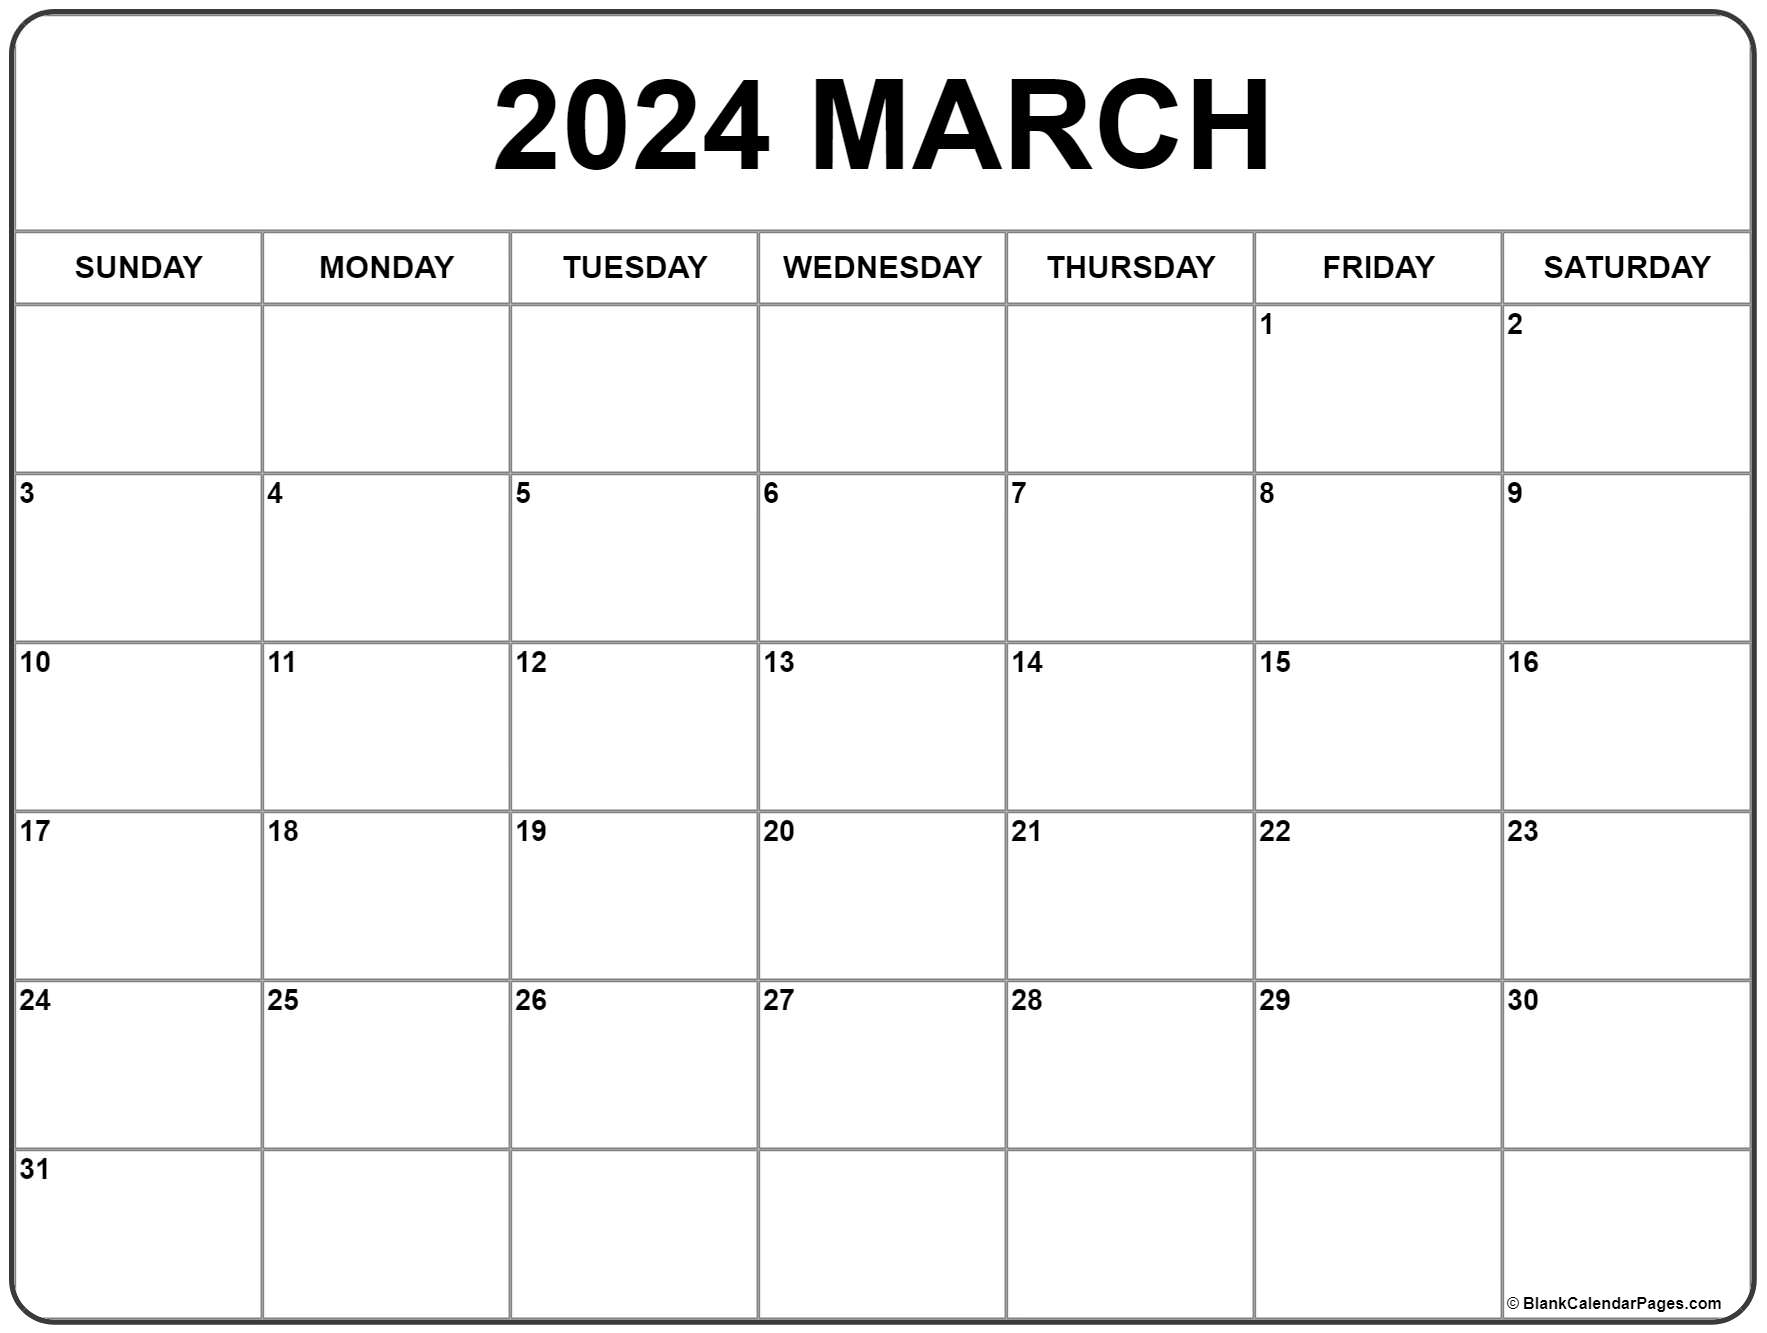 Calendar Of March 2021 March 2021 calendar | free printable monthly calendars